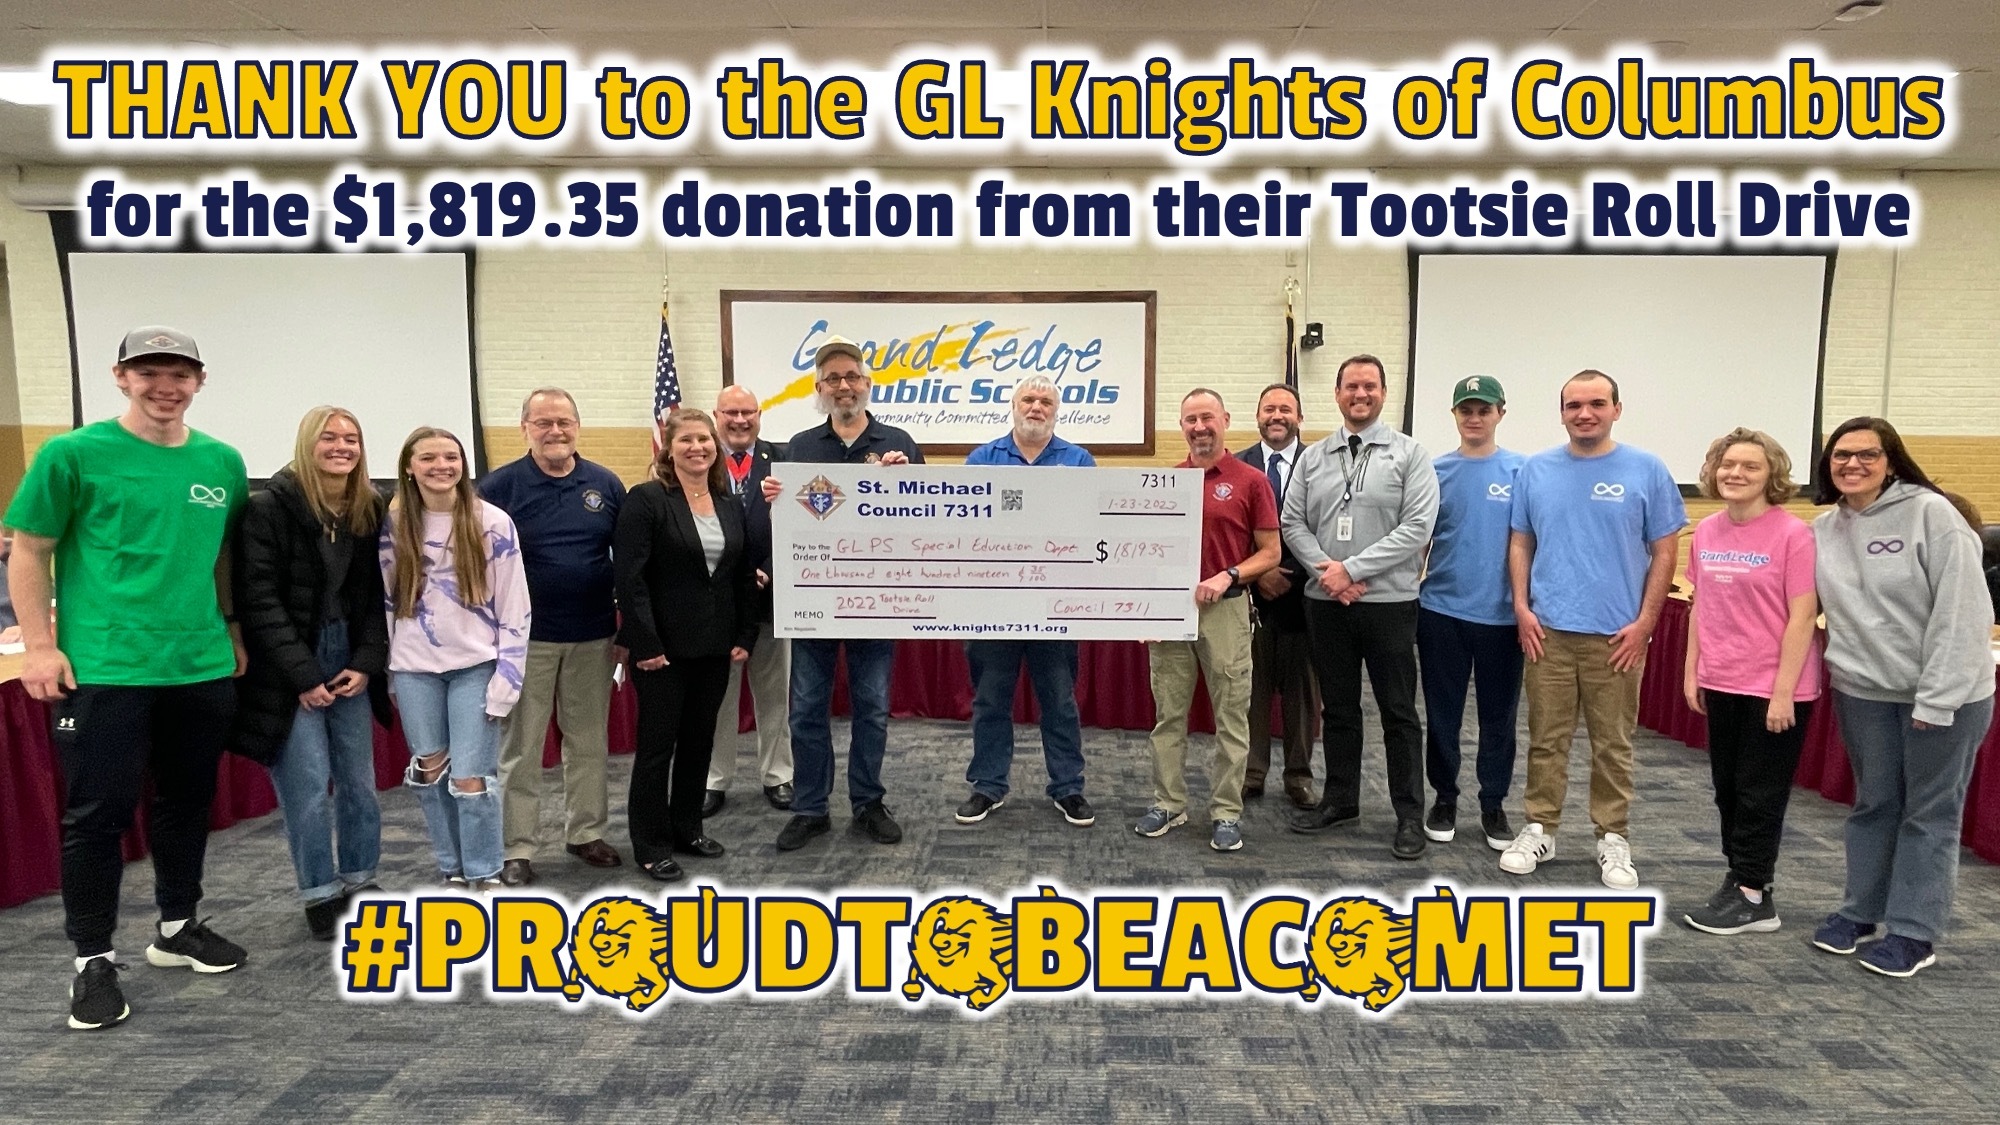 THANK YOU to the GL Knights of Columbus